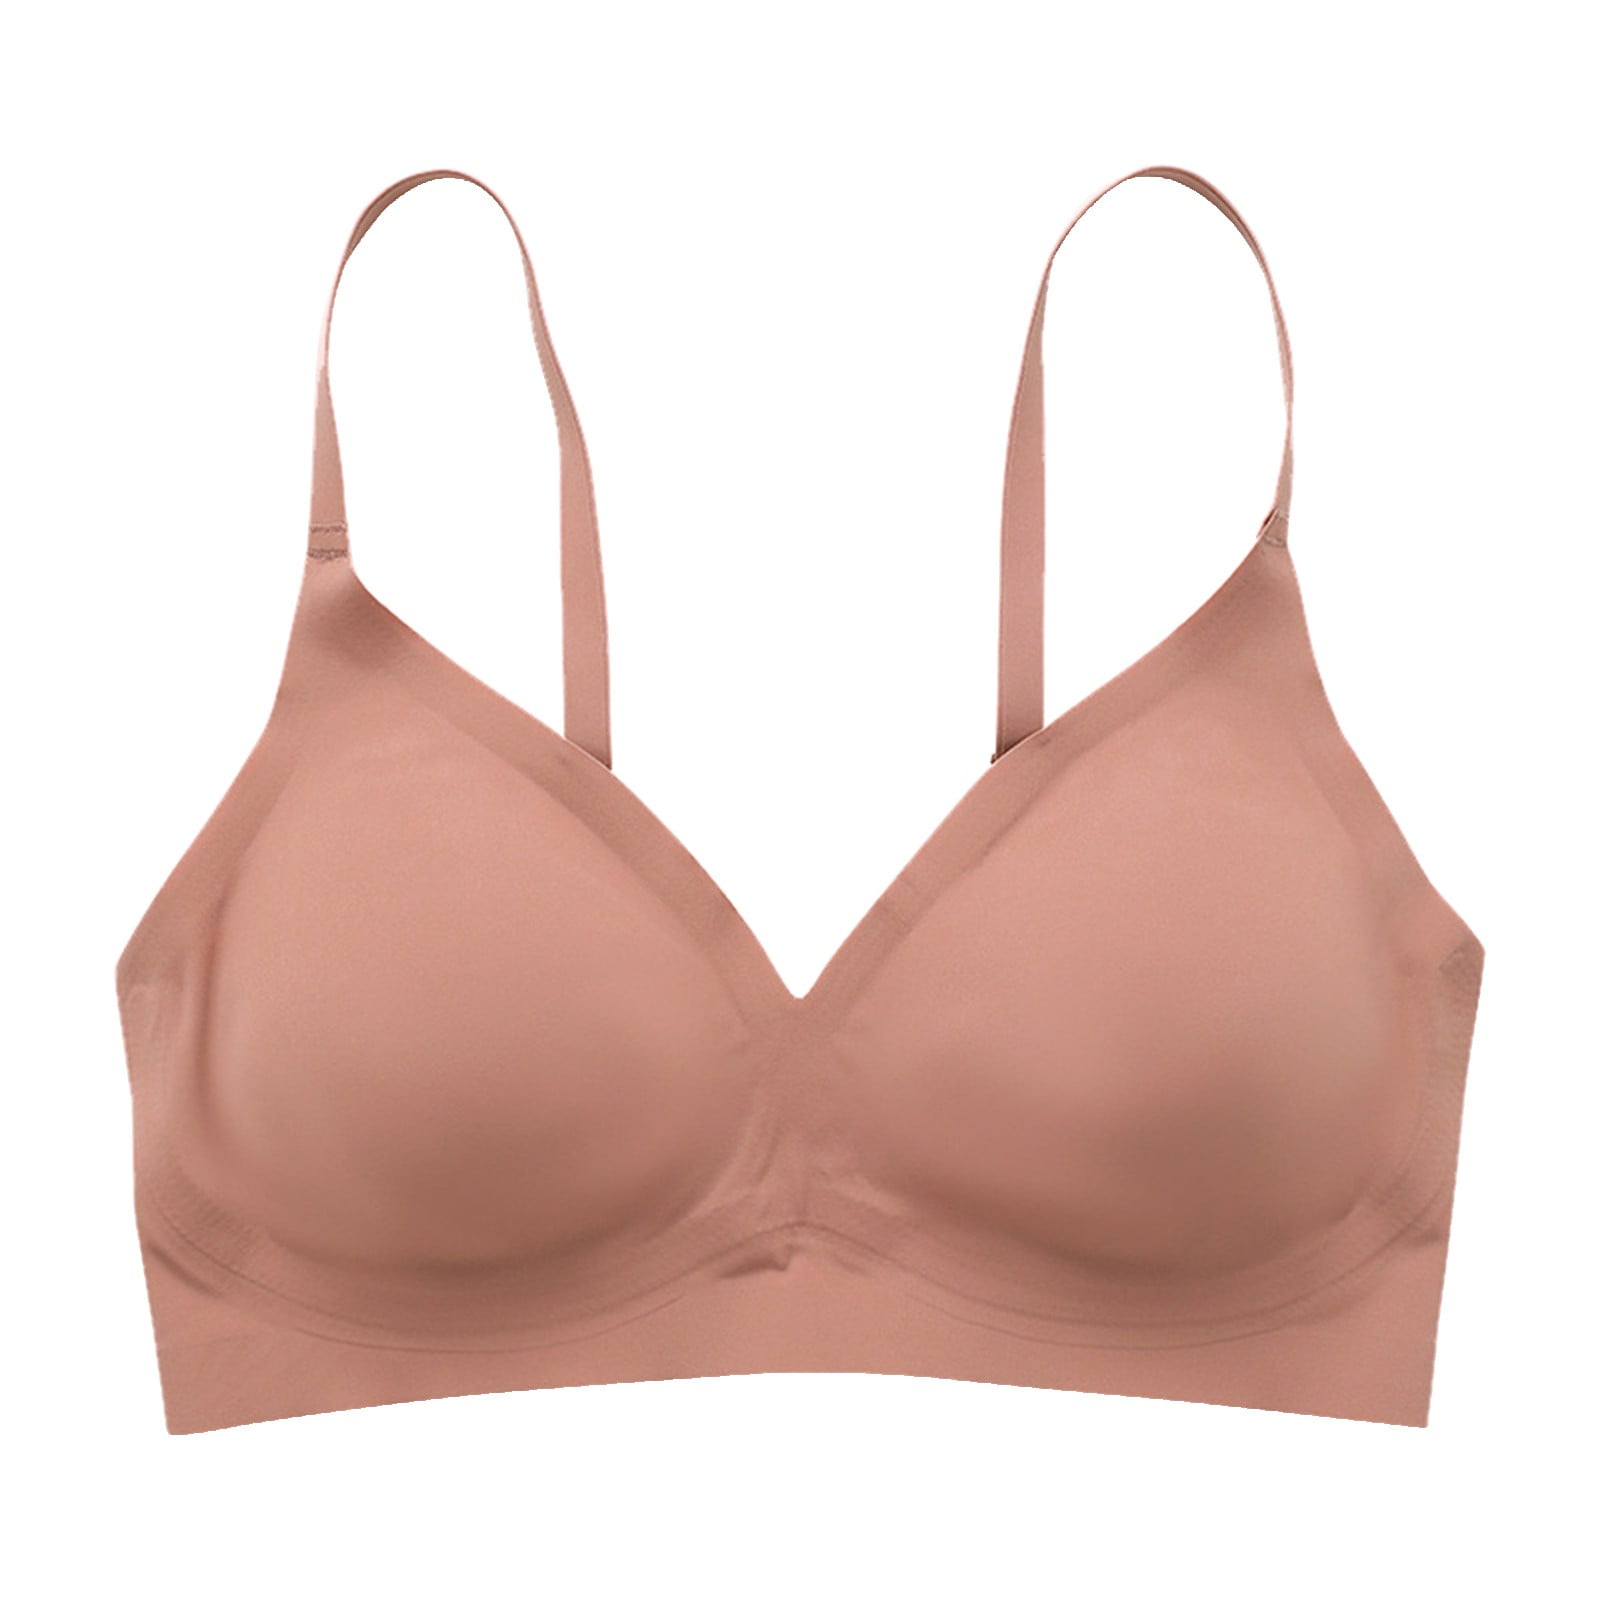 EHQJNJ Bralettes for Women Going Out Women's Comfortable and